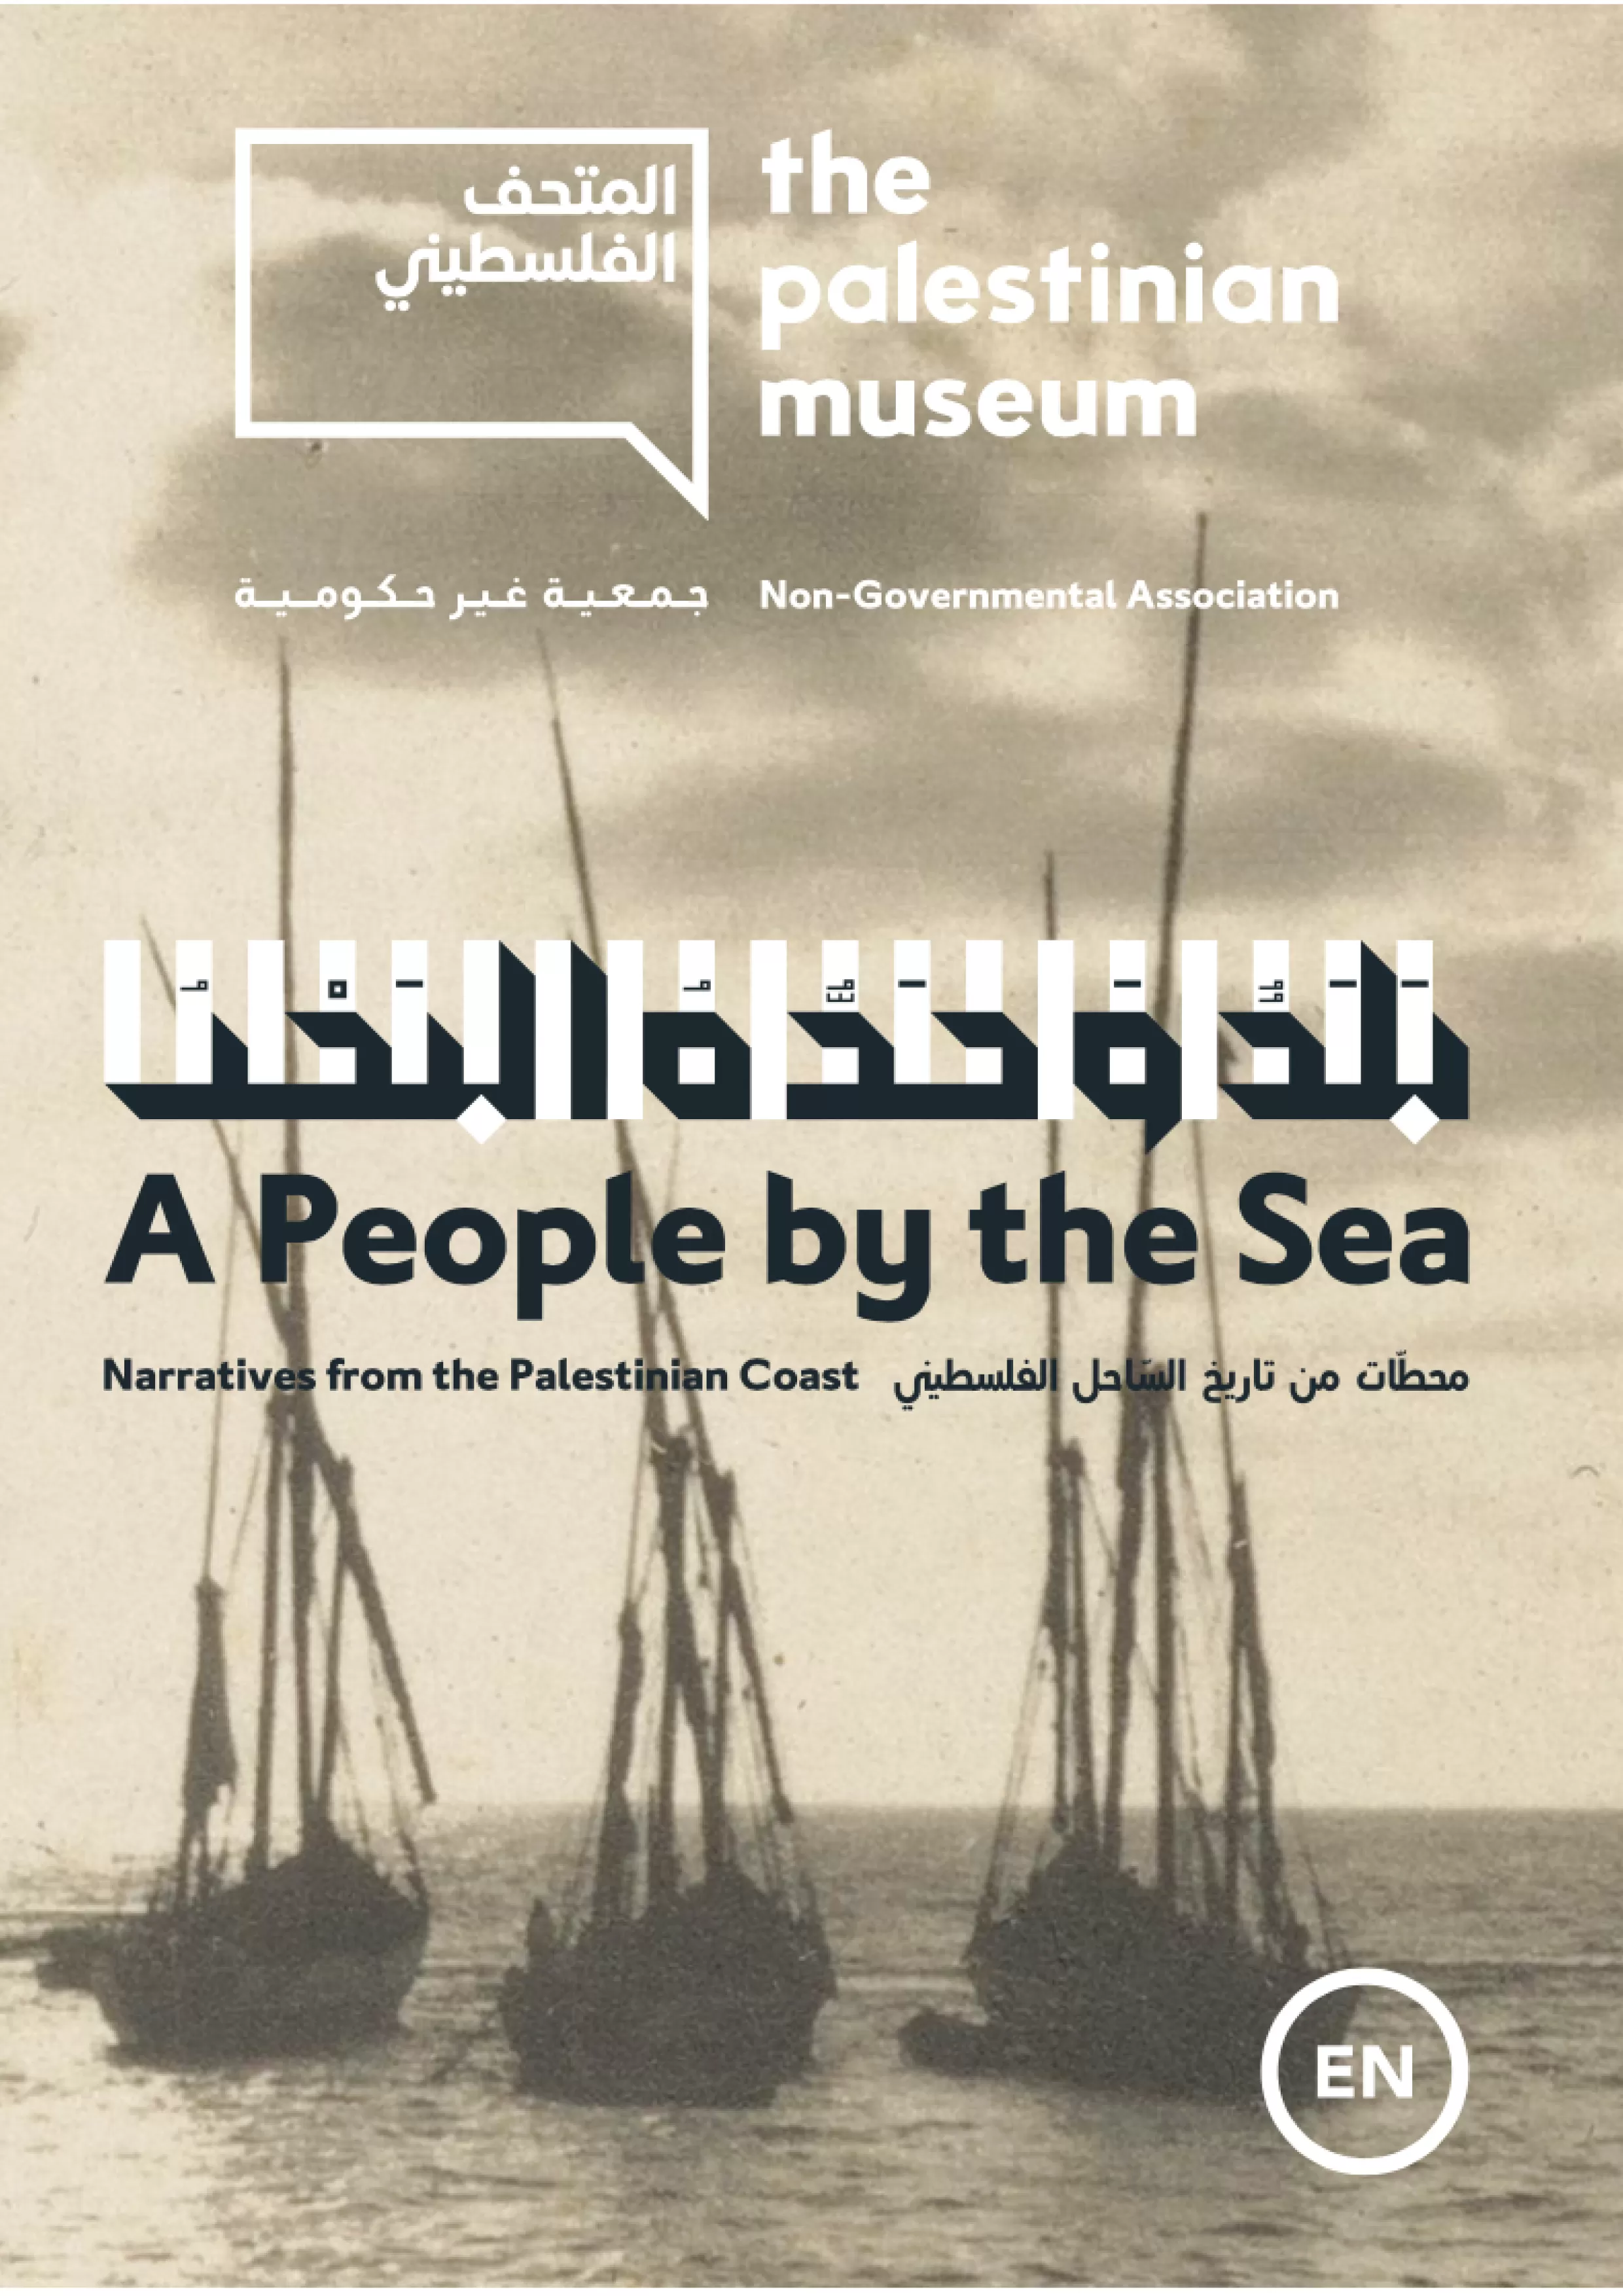 A People by the Sea: Narratives from the Palestinian Coast